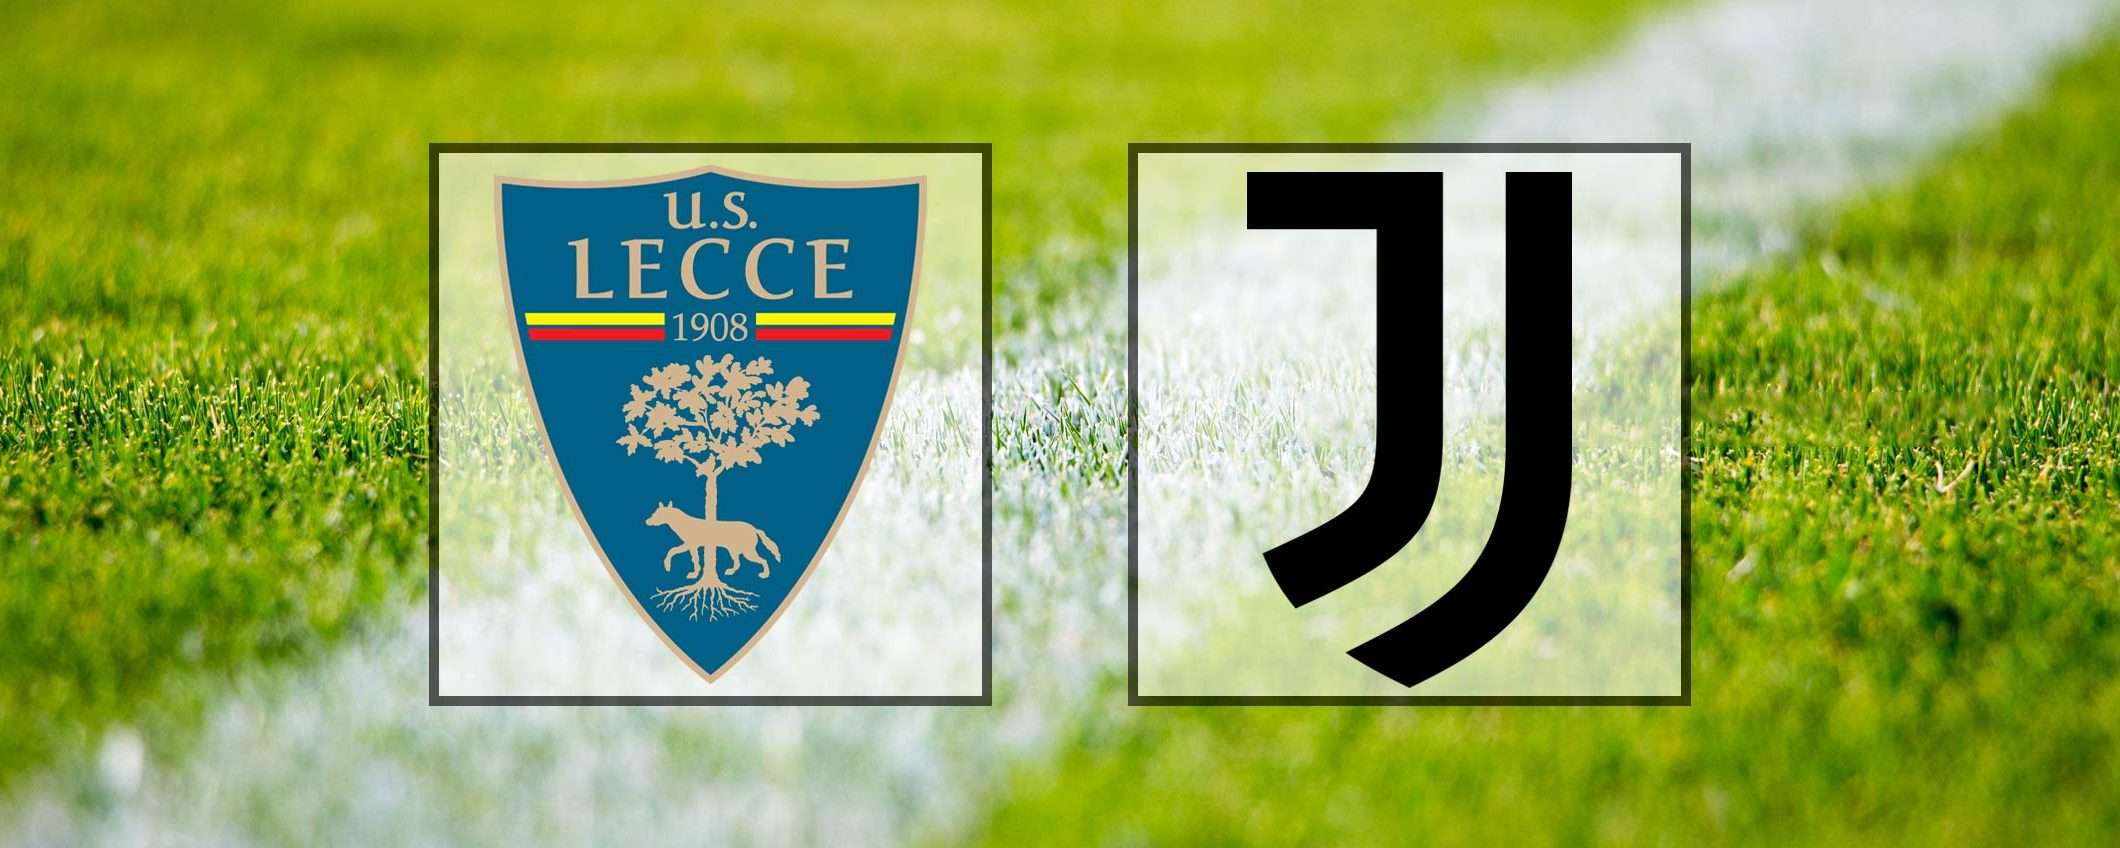 Come vedere Lecce-Juventus in streaming (Serie A)